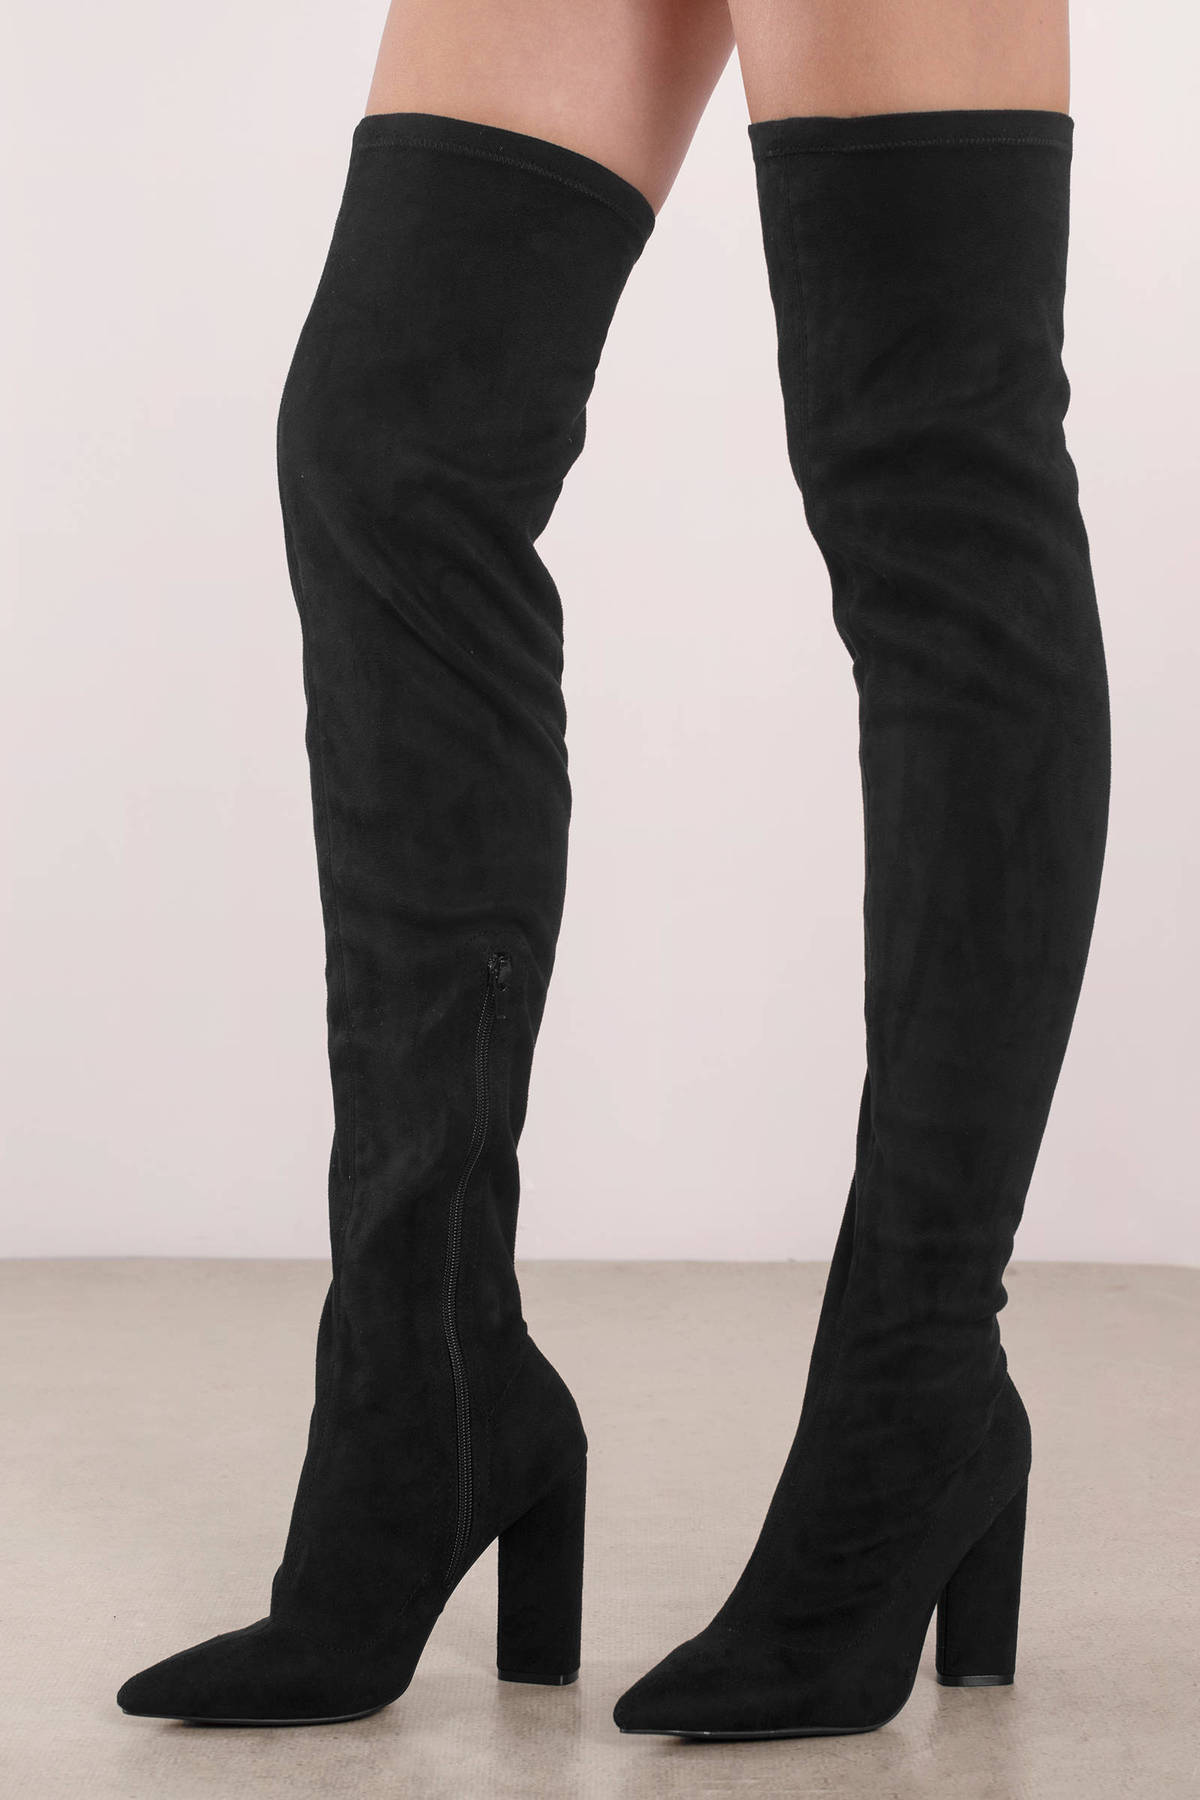 Black Boots - Fall Thigh High Boots - Tall Black Skinny Boots